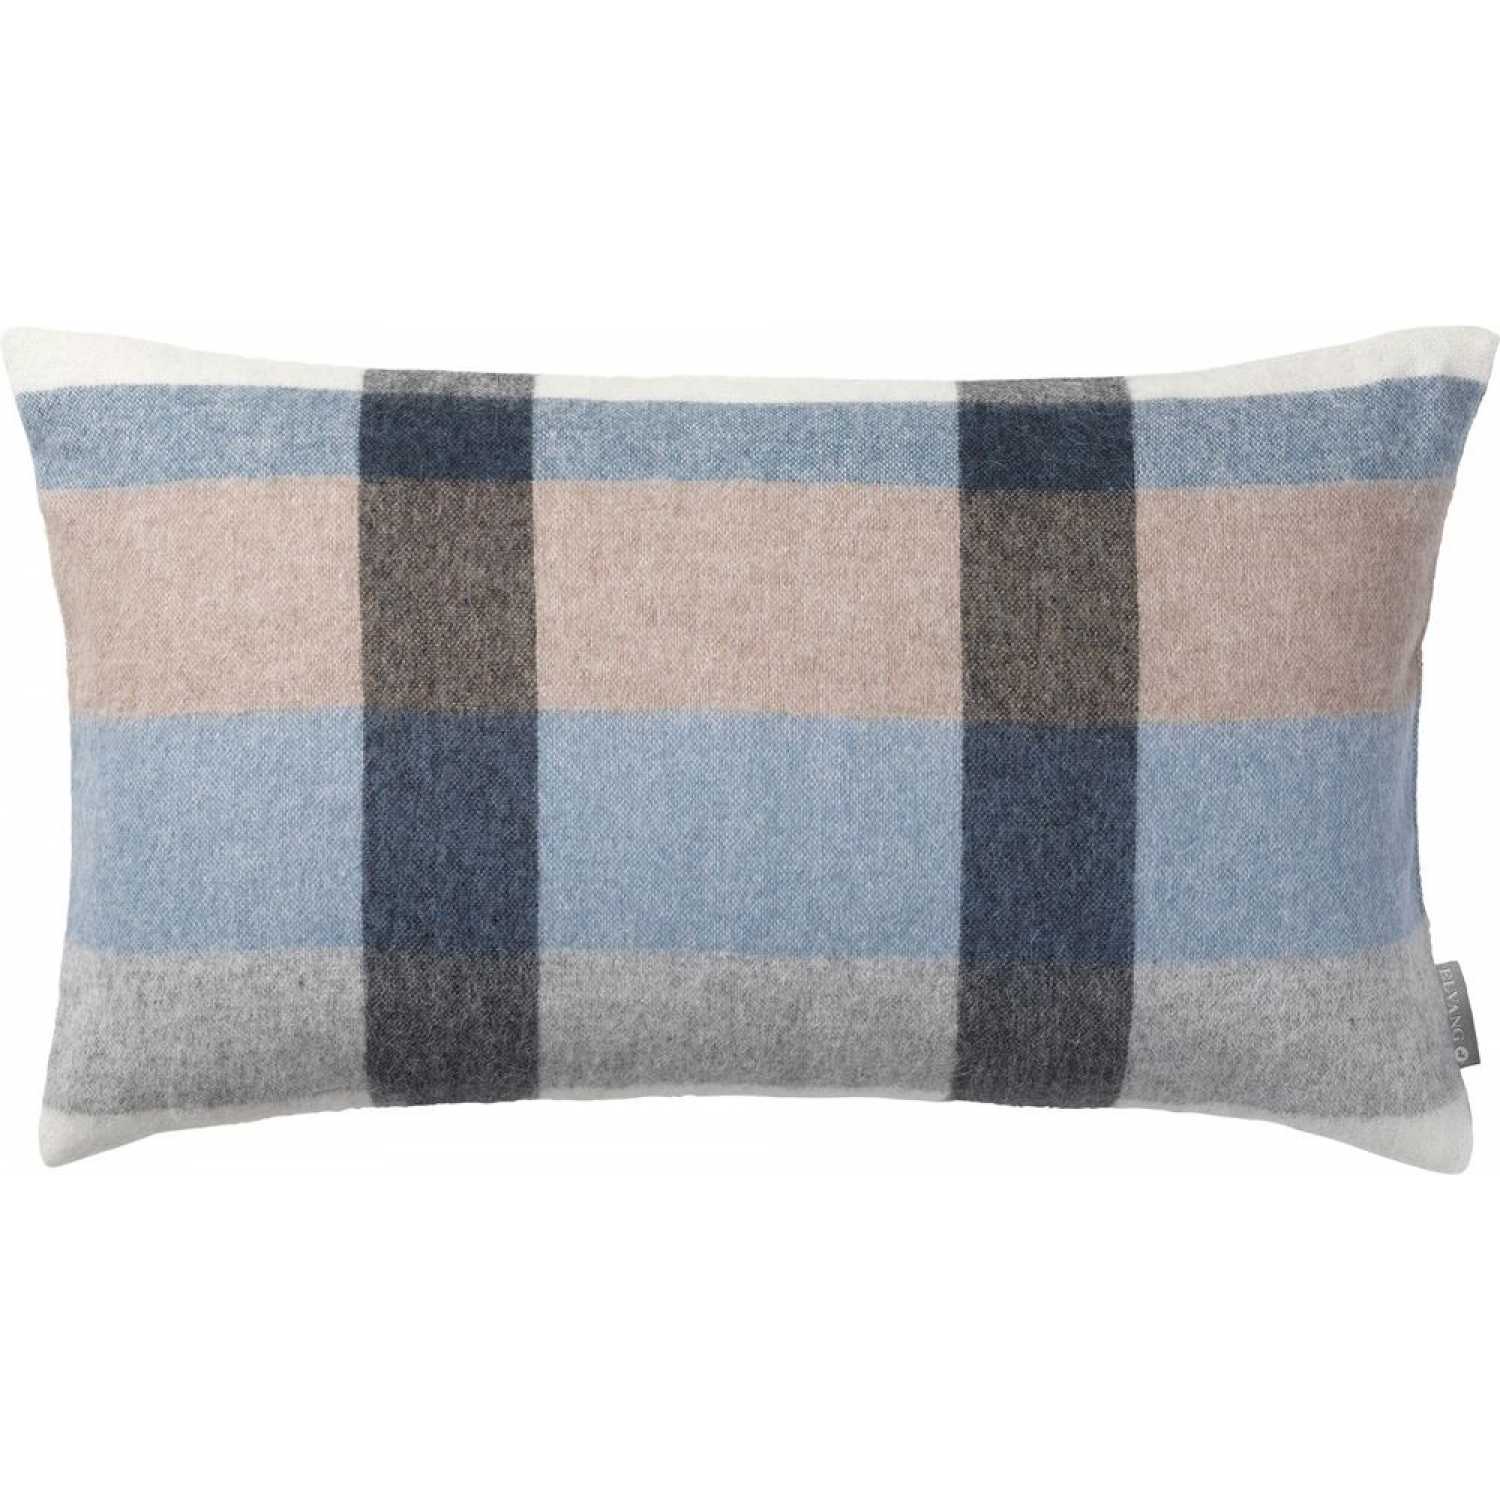 Elvang Intersection Cushion Cover - Ocean Blue & White & Grey